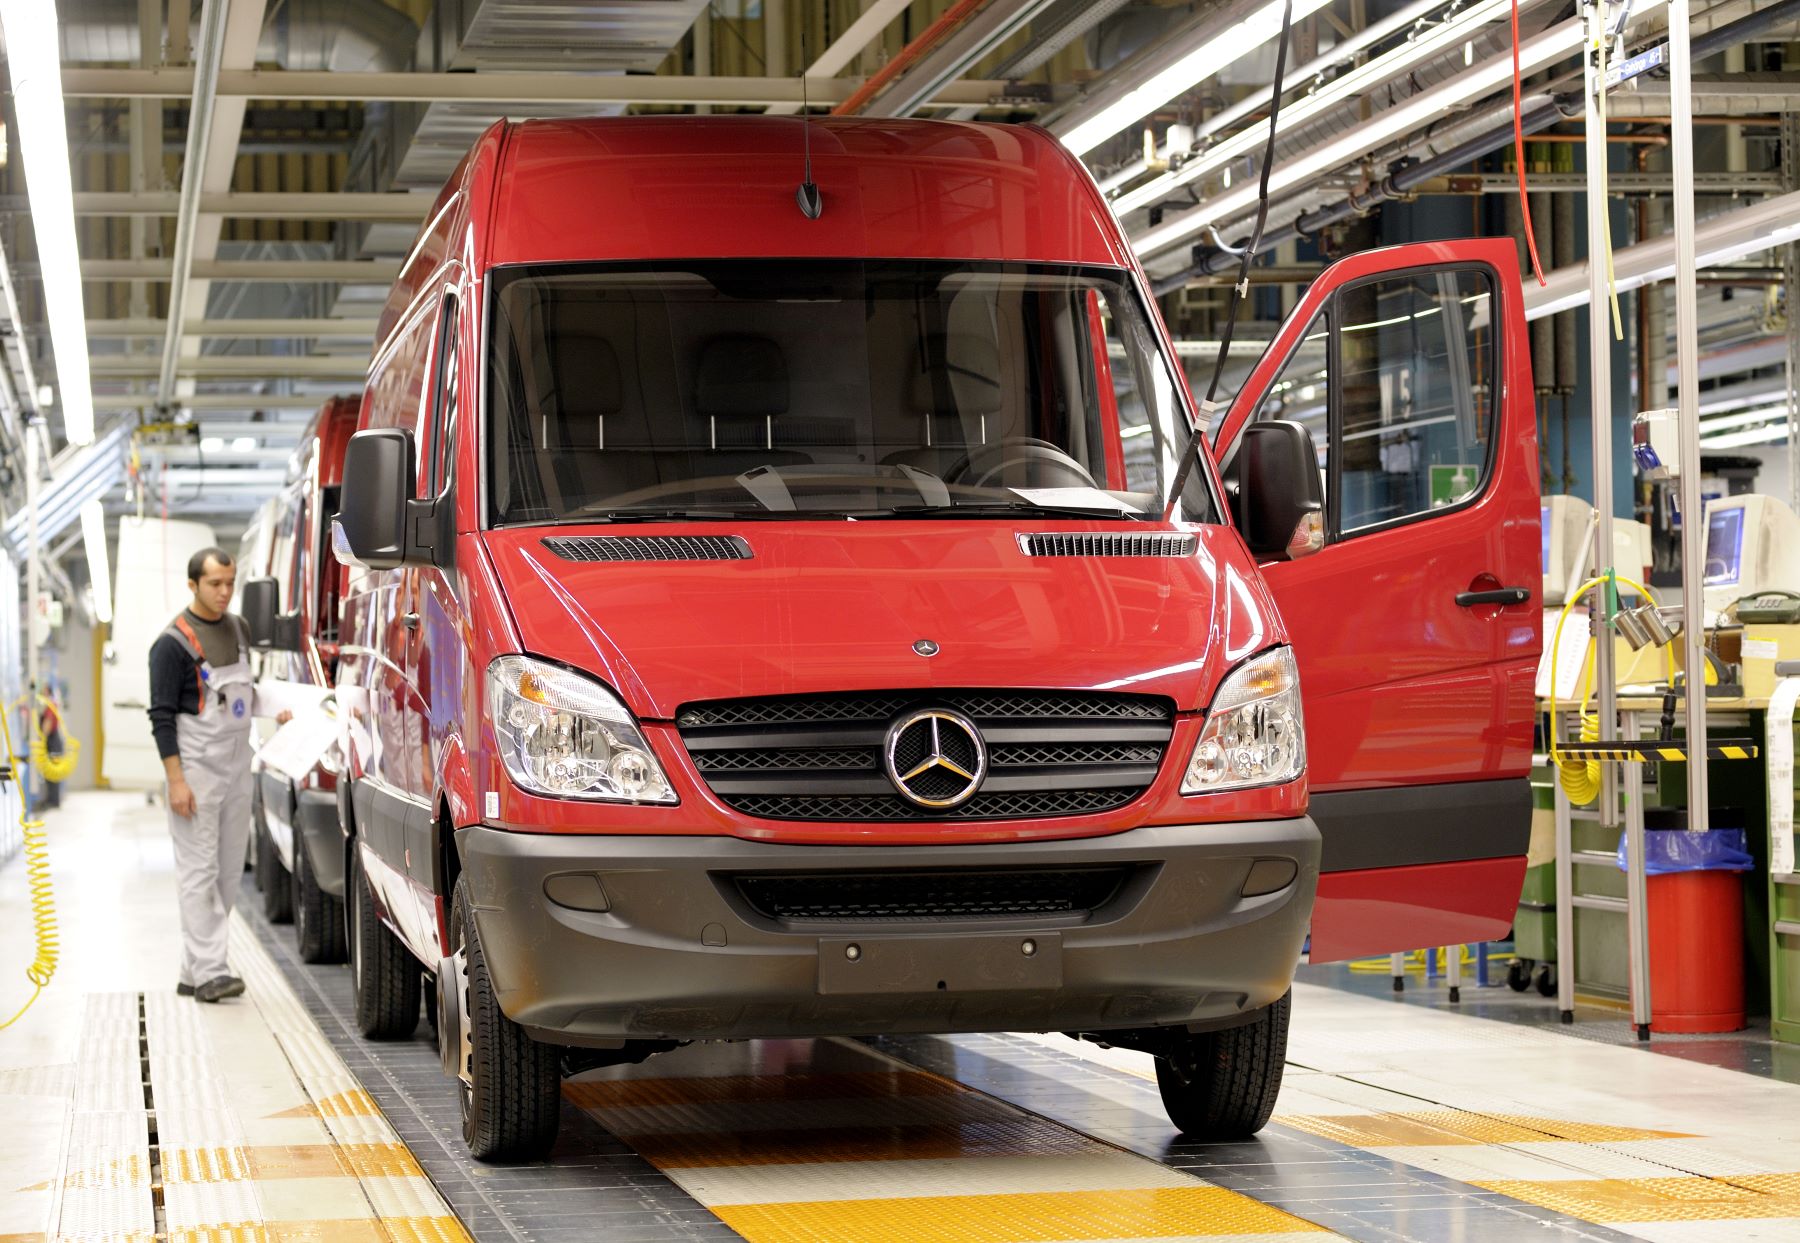 Mercedes-Benz Sprinter van problems overlooked during factory assembly and production line construction and maintenance